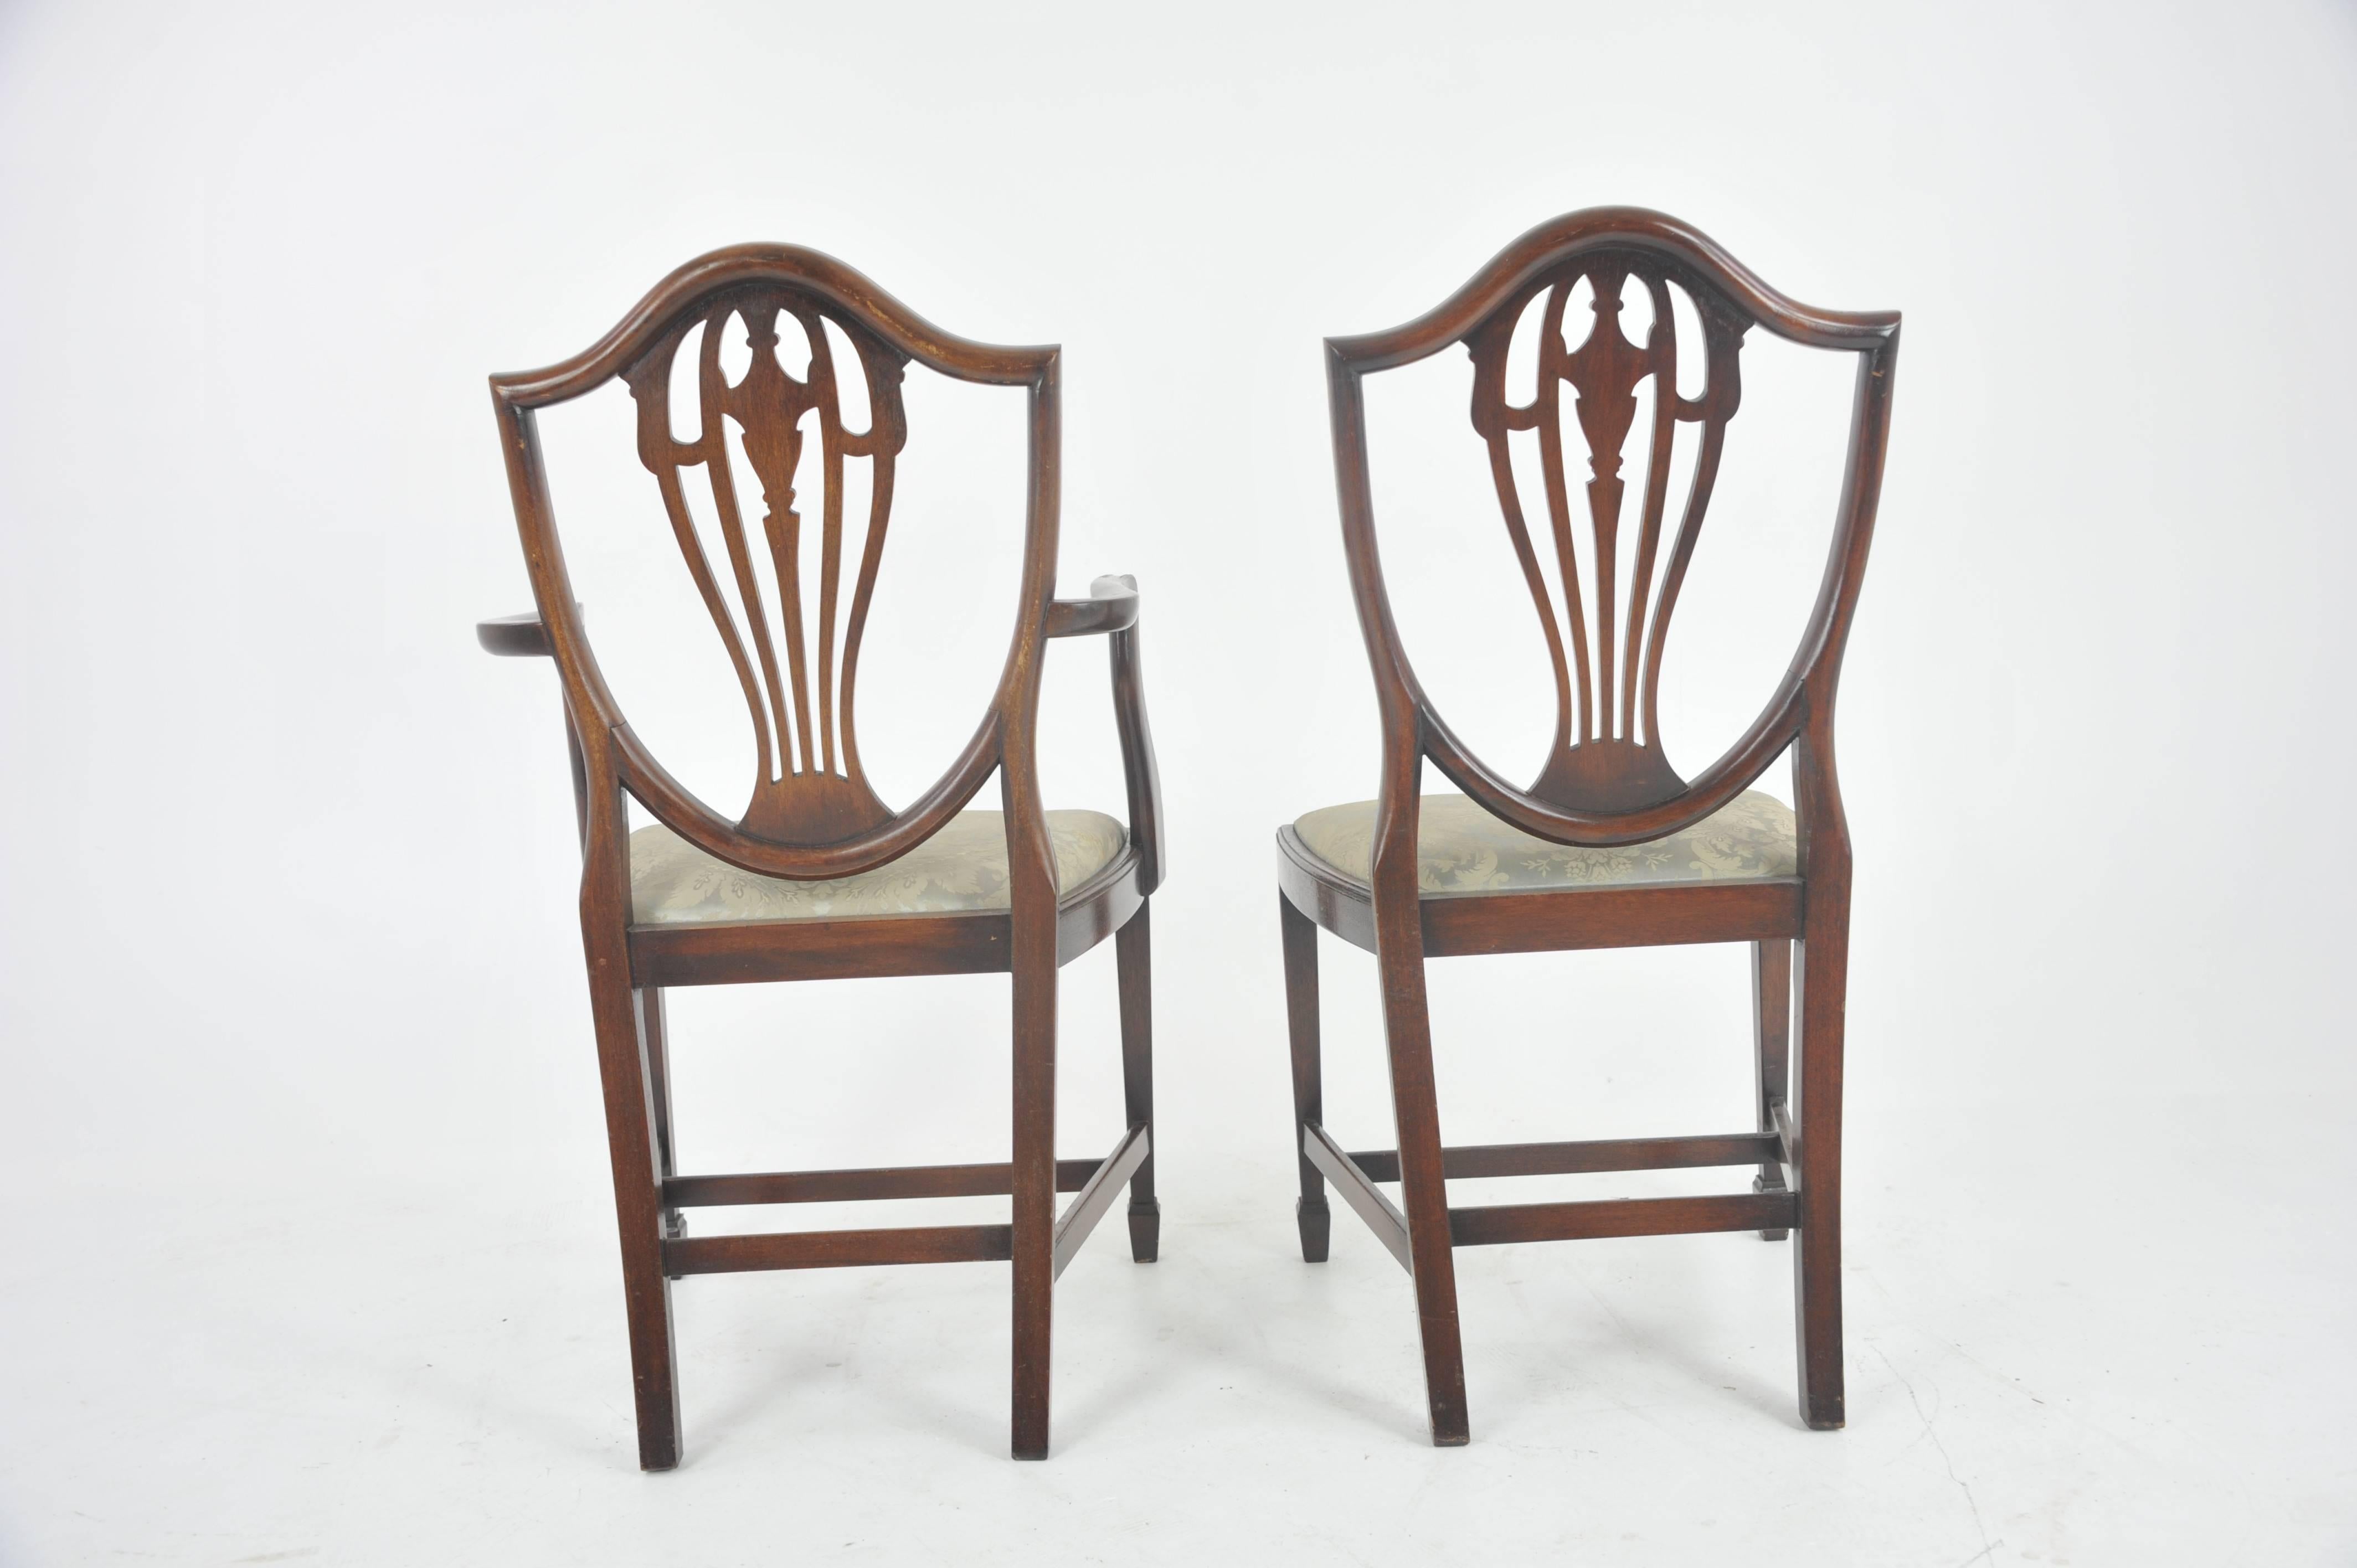 10 Dining Chairs, Antique Dining Chairs, Hepplewhite, Mahogany, B1071 REDUCED!!! 2